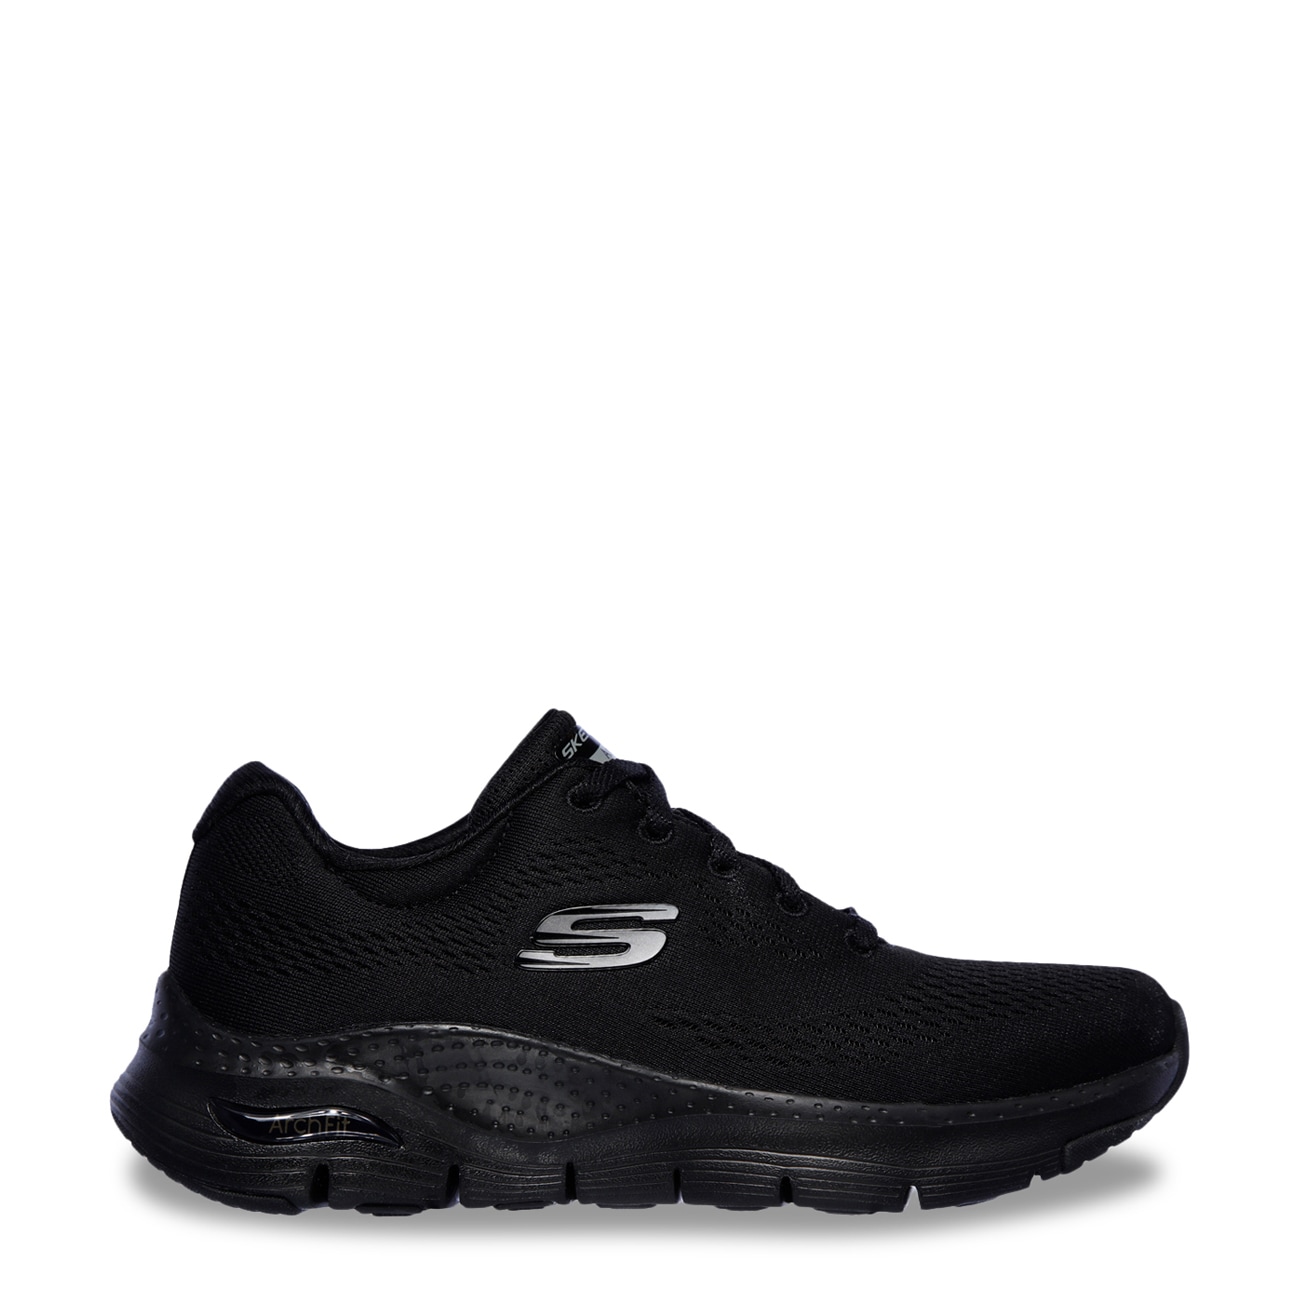 purchase skechers shoes 